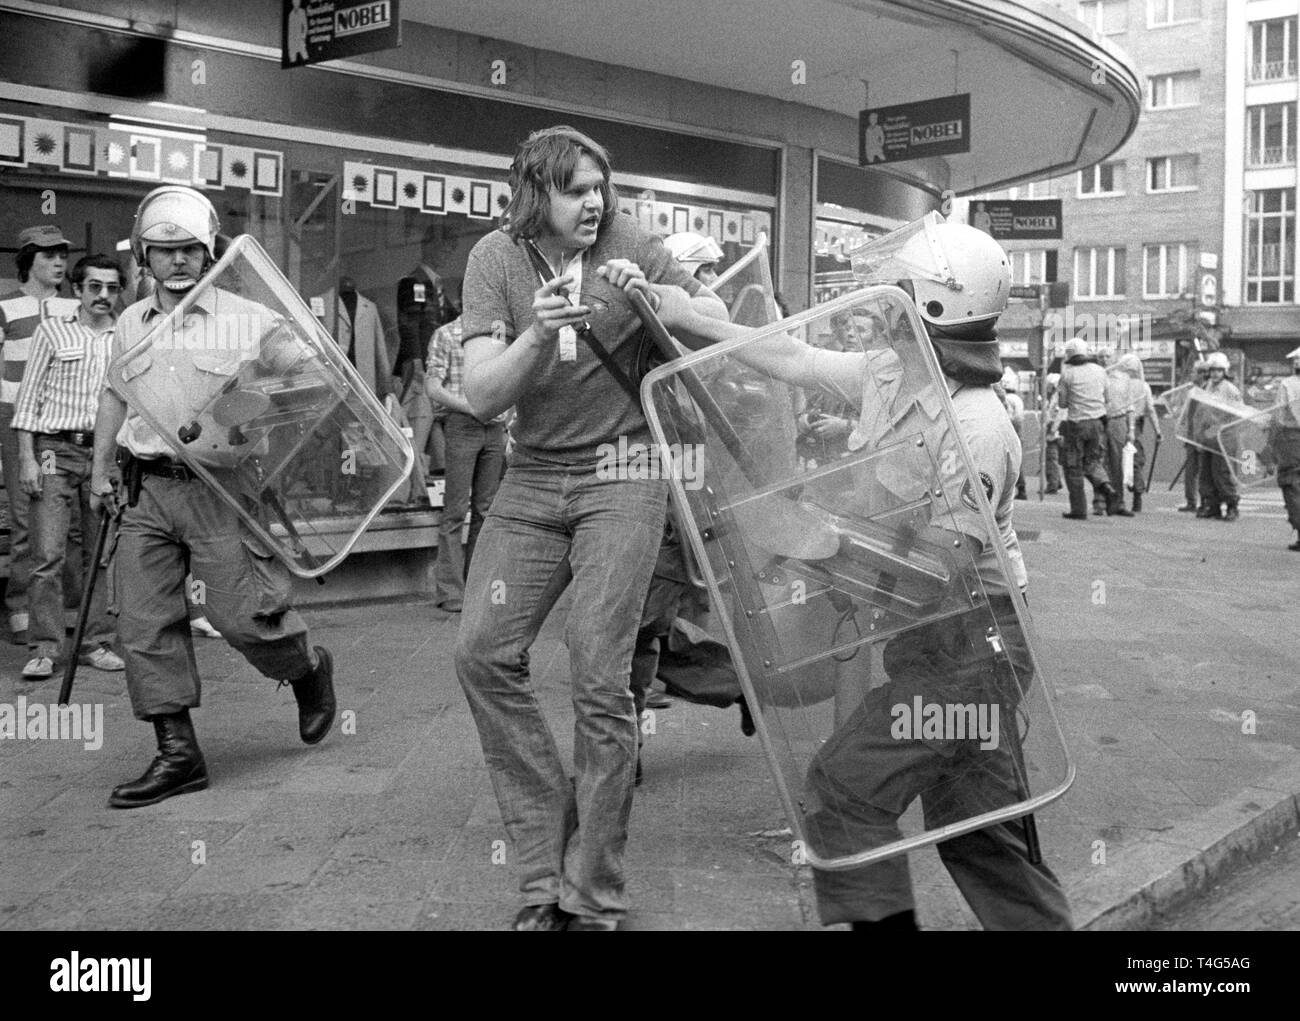 Clashes between protestors and police during a demonstration in Frankfurt on 10 May 1976 with around a dozen policemen injured and seven demonstrators arrested. They protested the death of terrorist Ulrike Meinhof who commited suicide on 5 May 1976. | usage worldwide Stock Photo